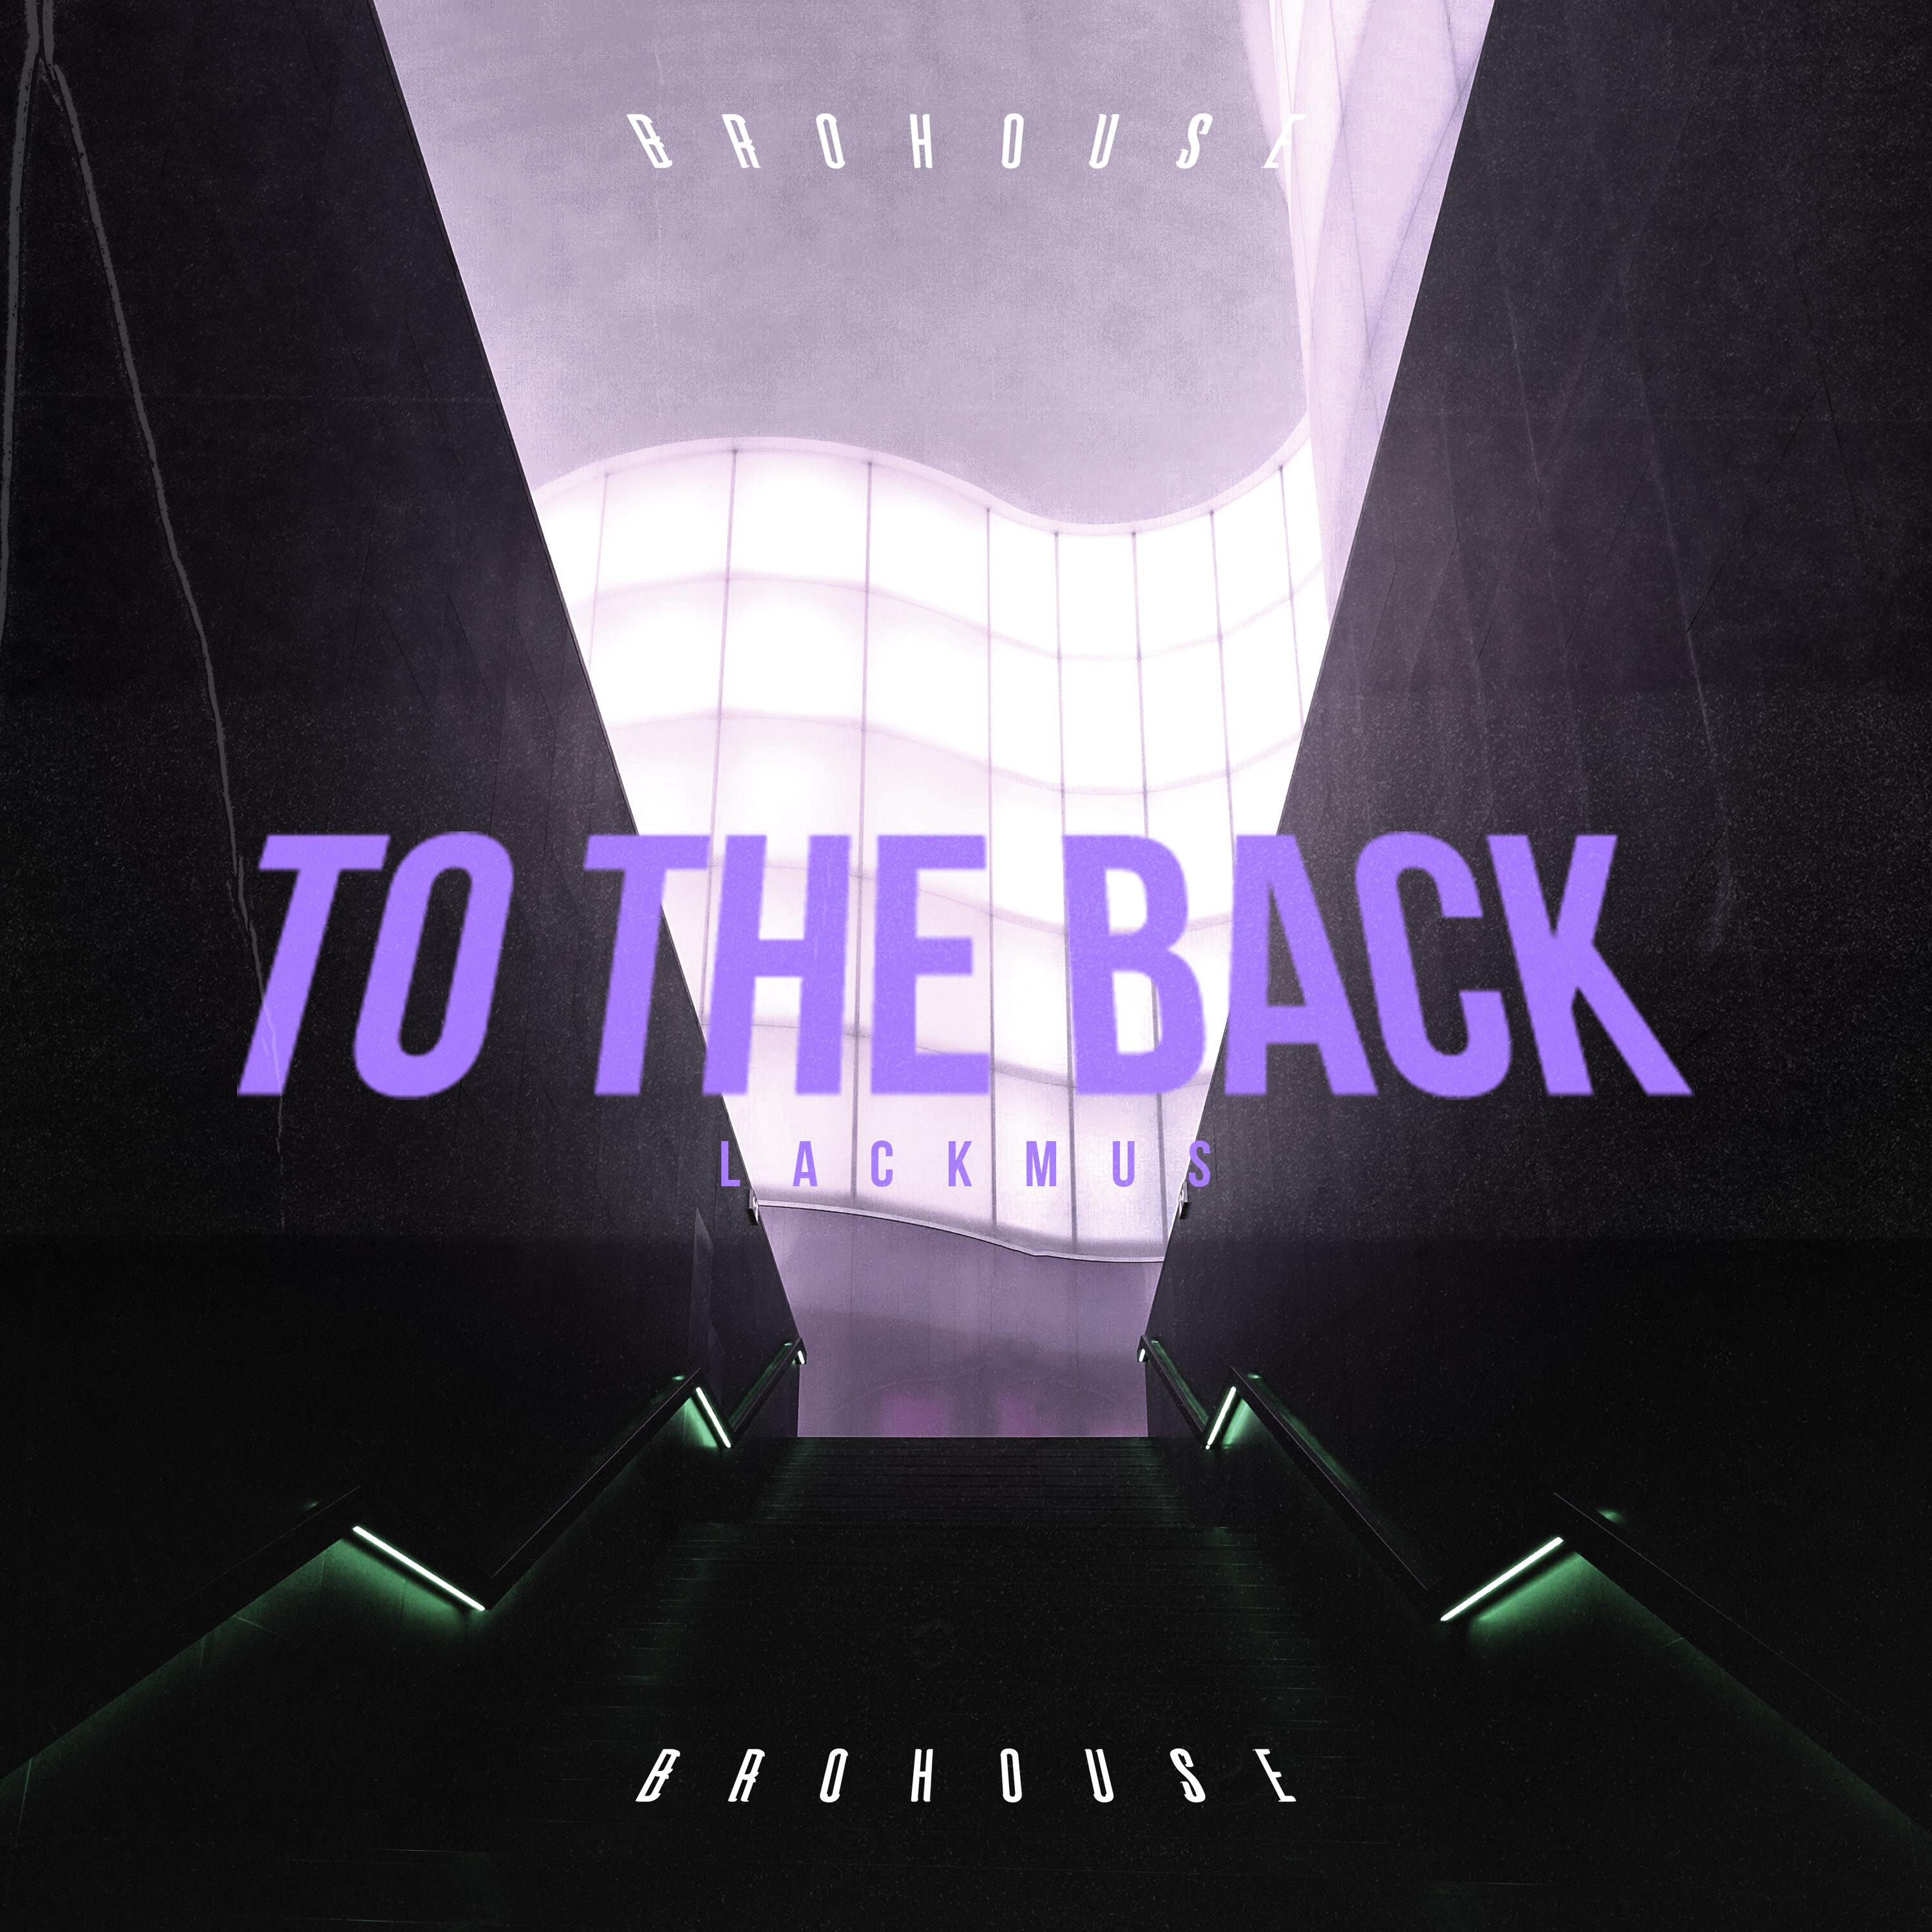 Lackmus - To the Back